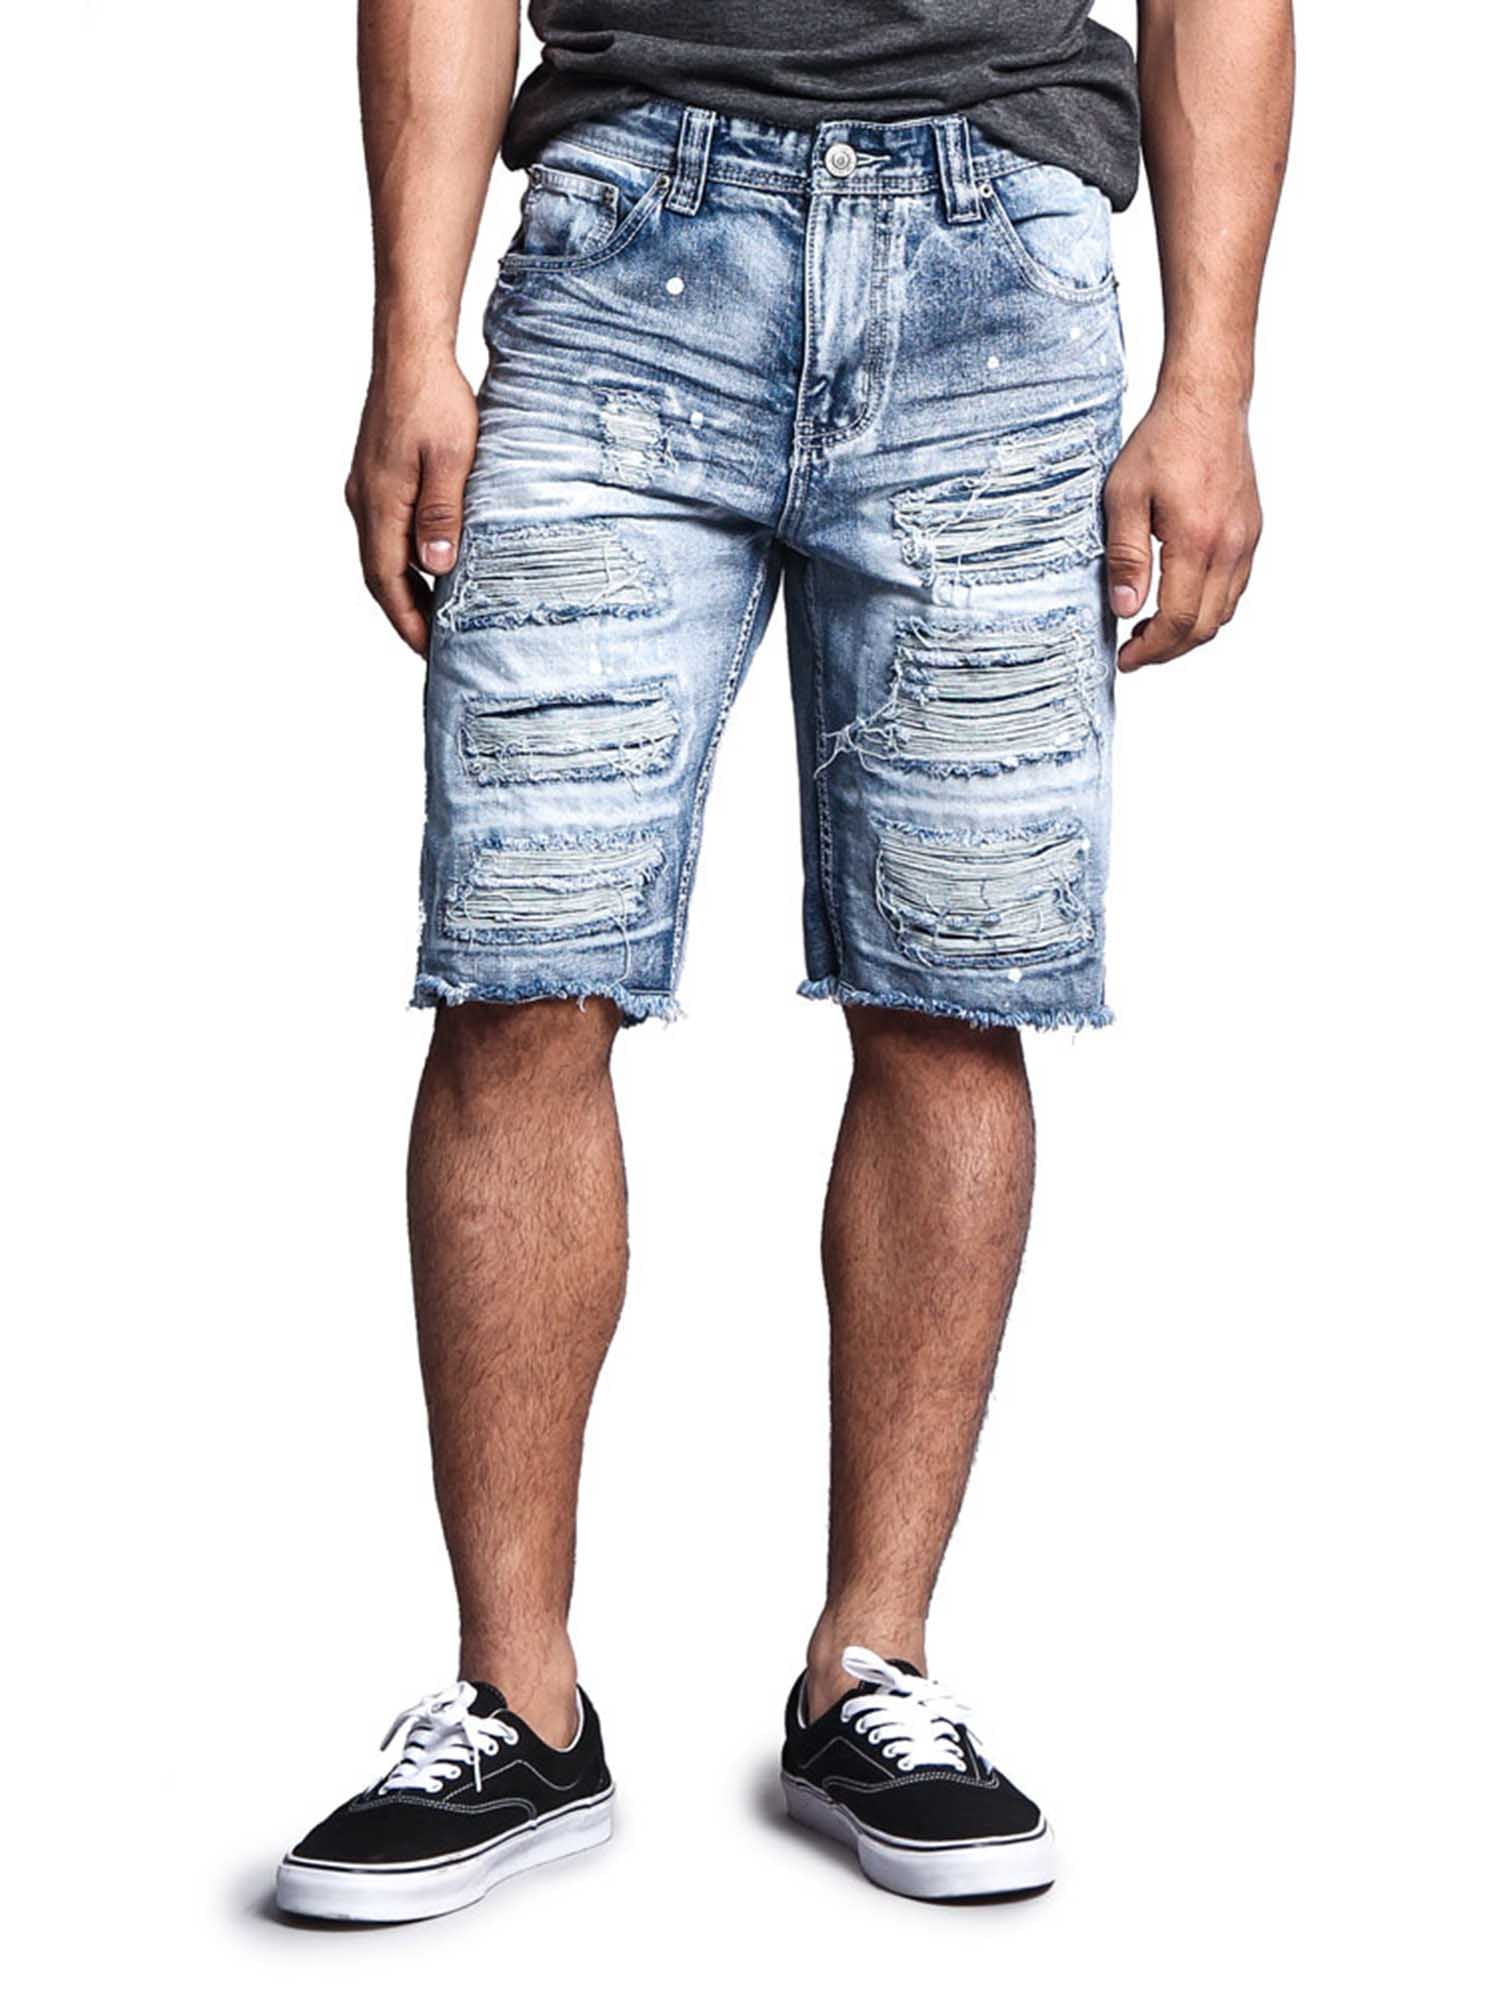 Victorious Mens Ripped & Distressed Denim Shorts 